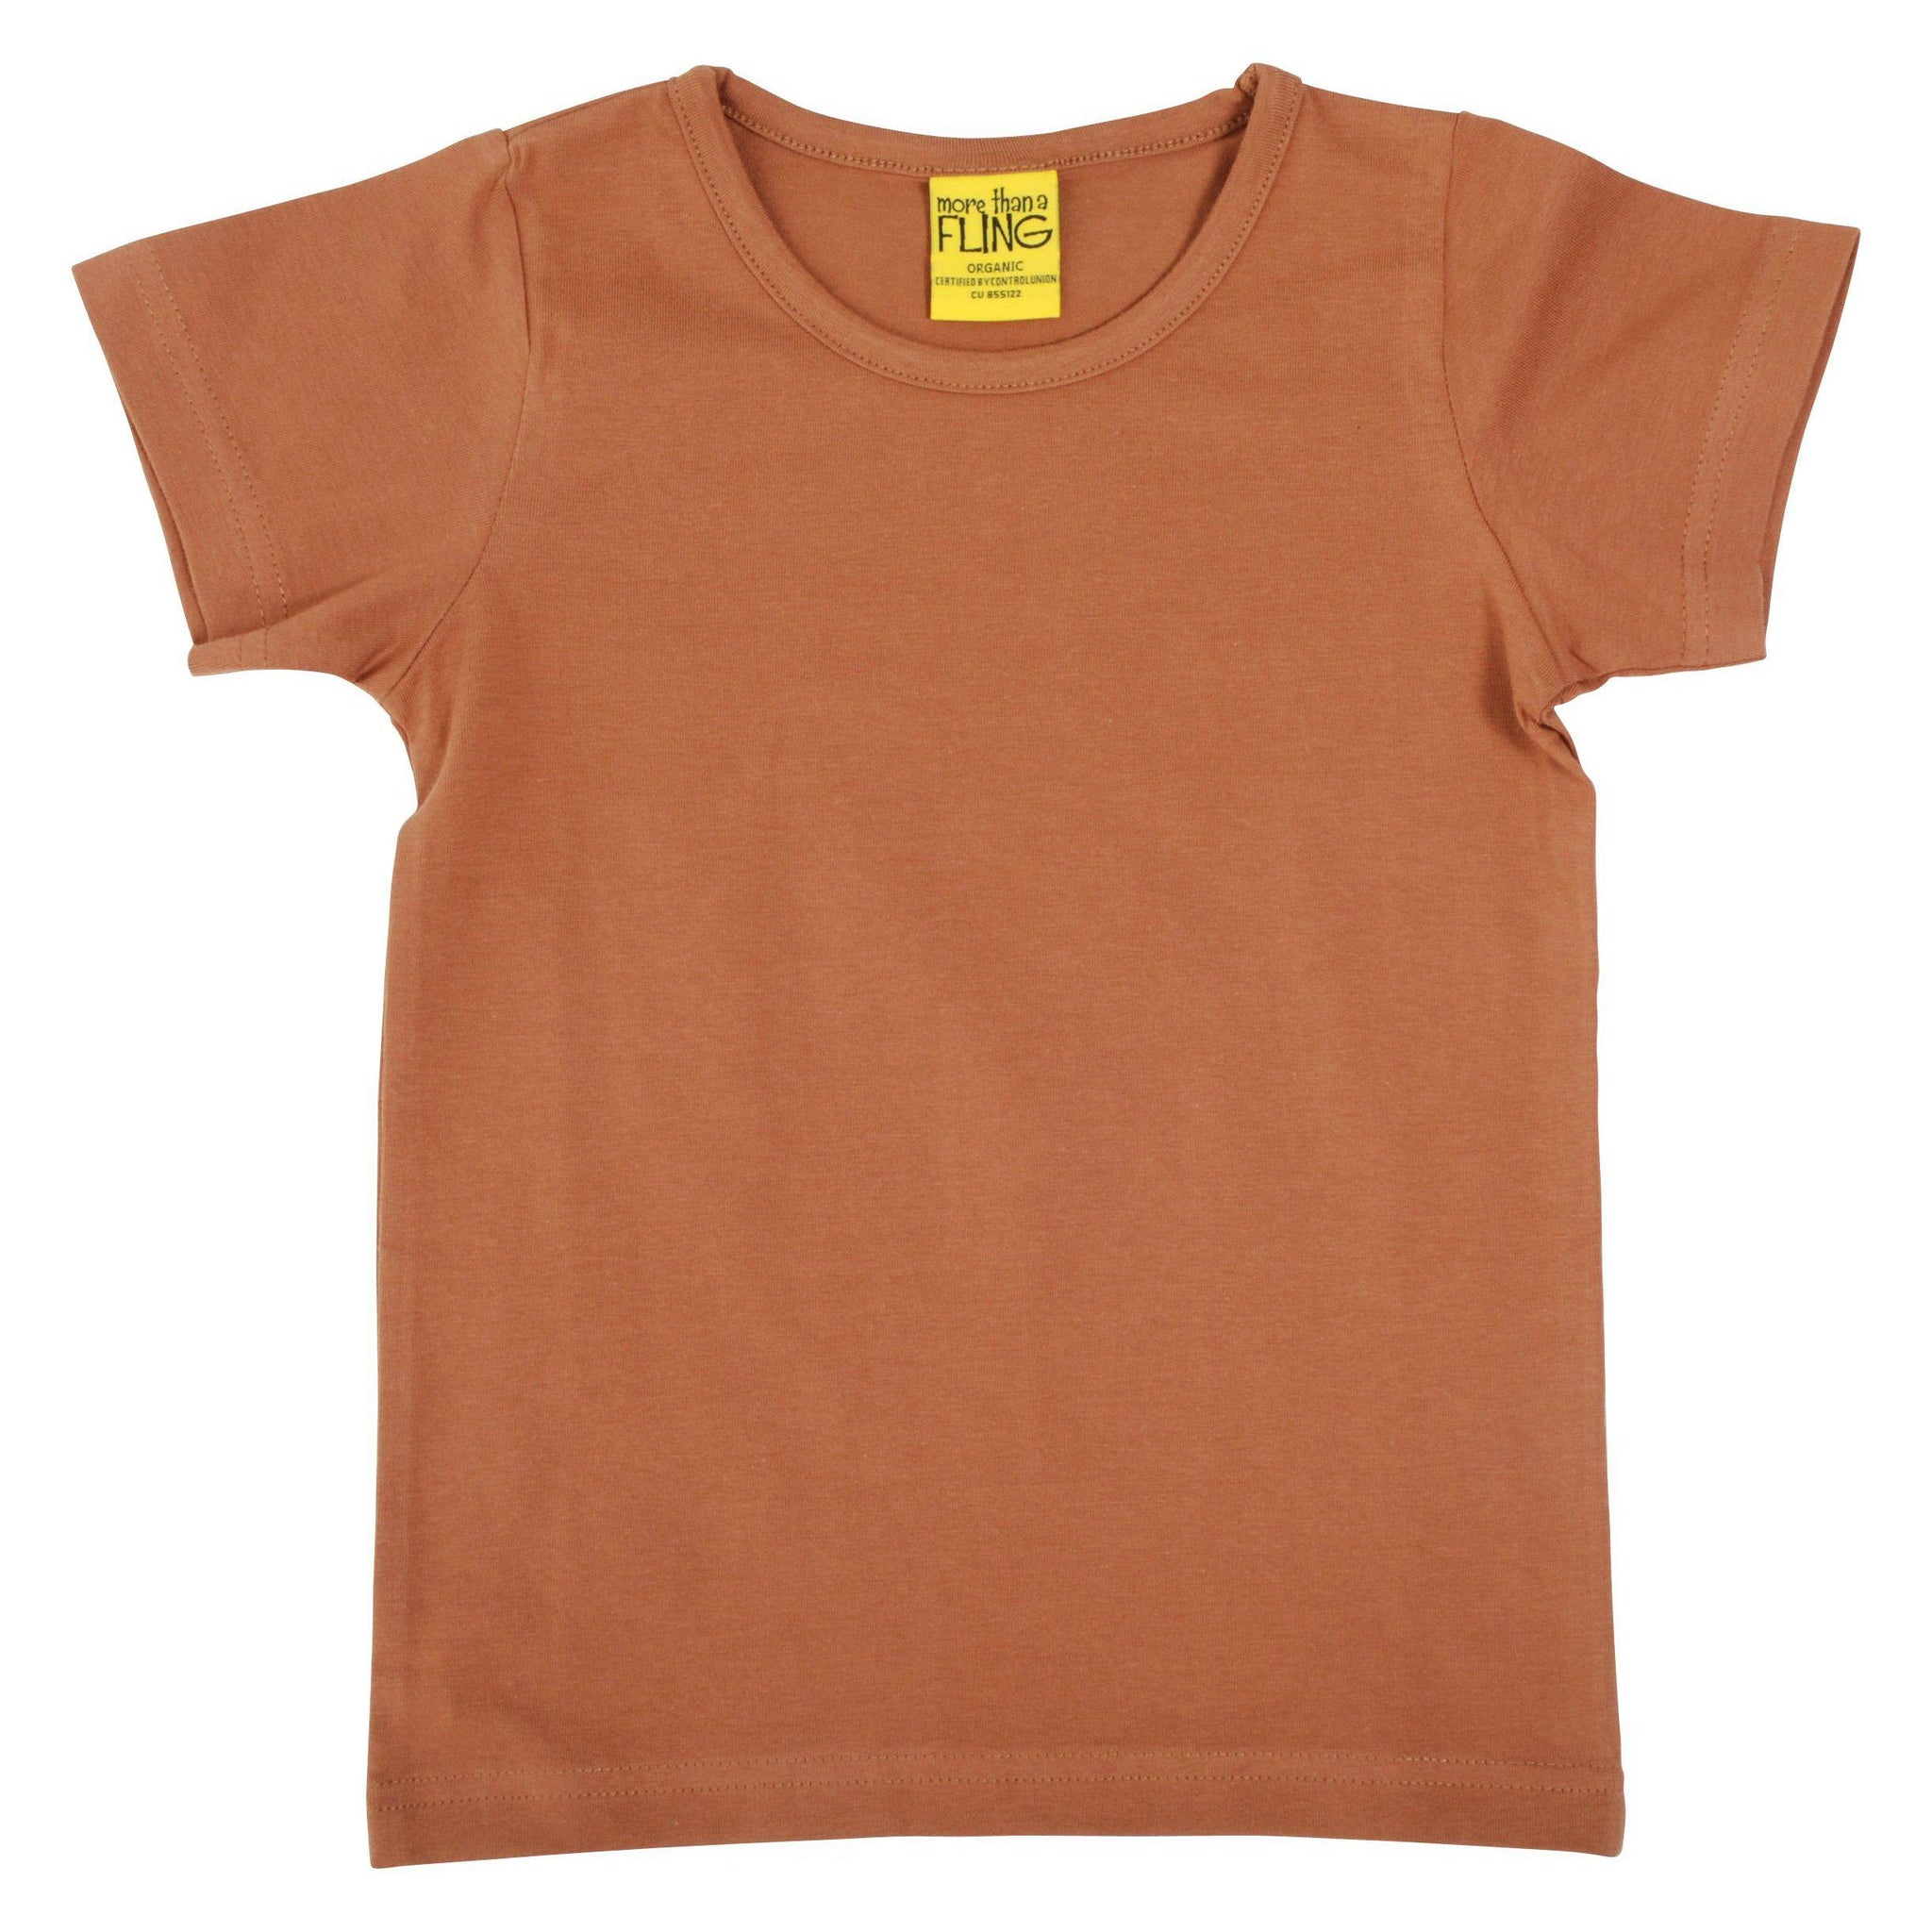 More than a Fling - Chipmunk Short Sleeved Top (4-6 Years)